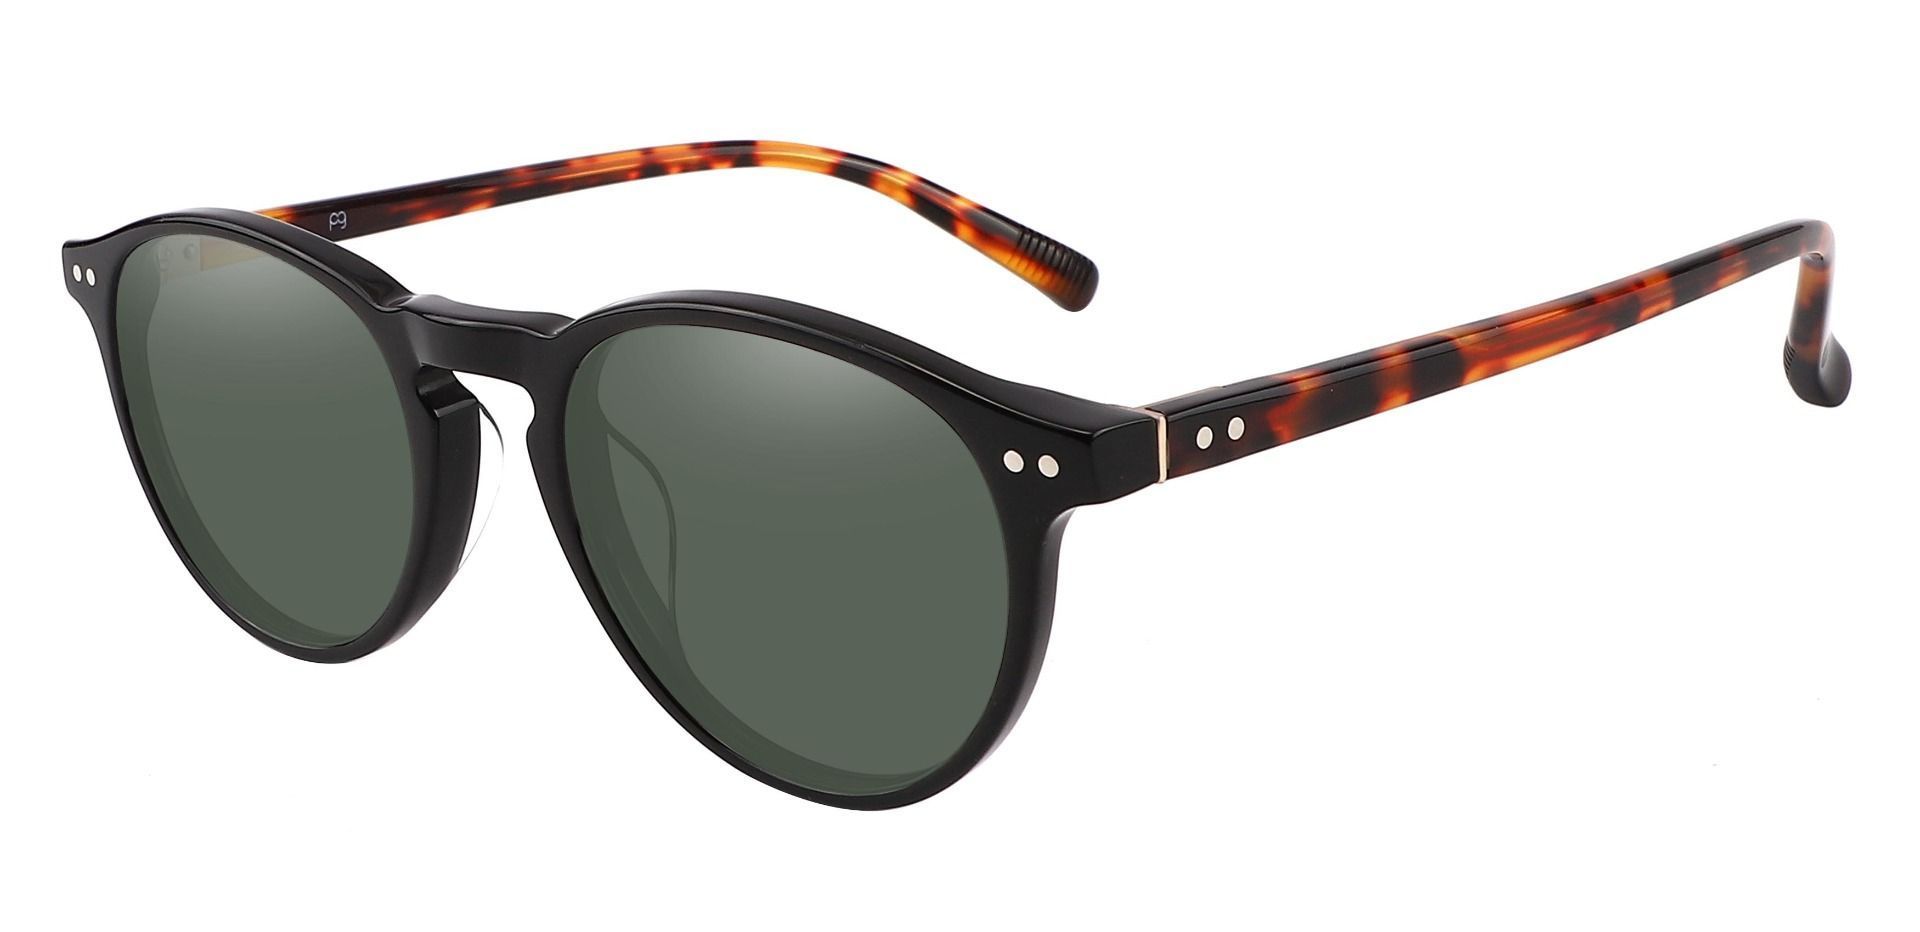 Monarch Oval Non-Rx Sunglasses - Black Frame With Green Lenses